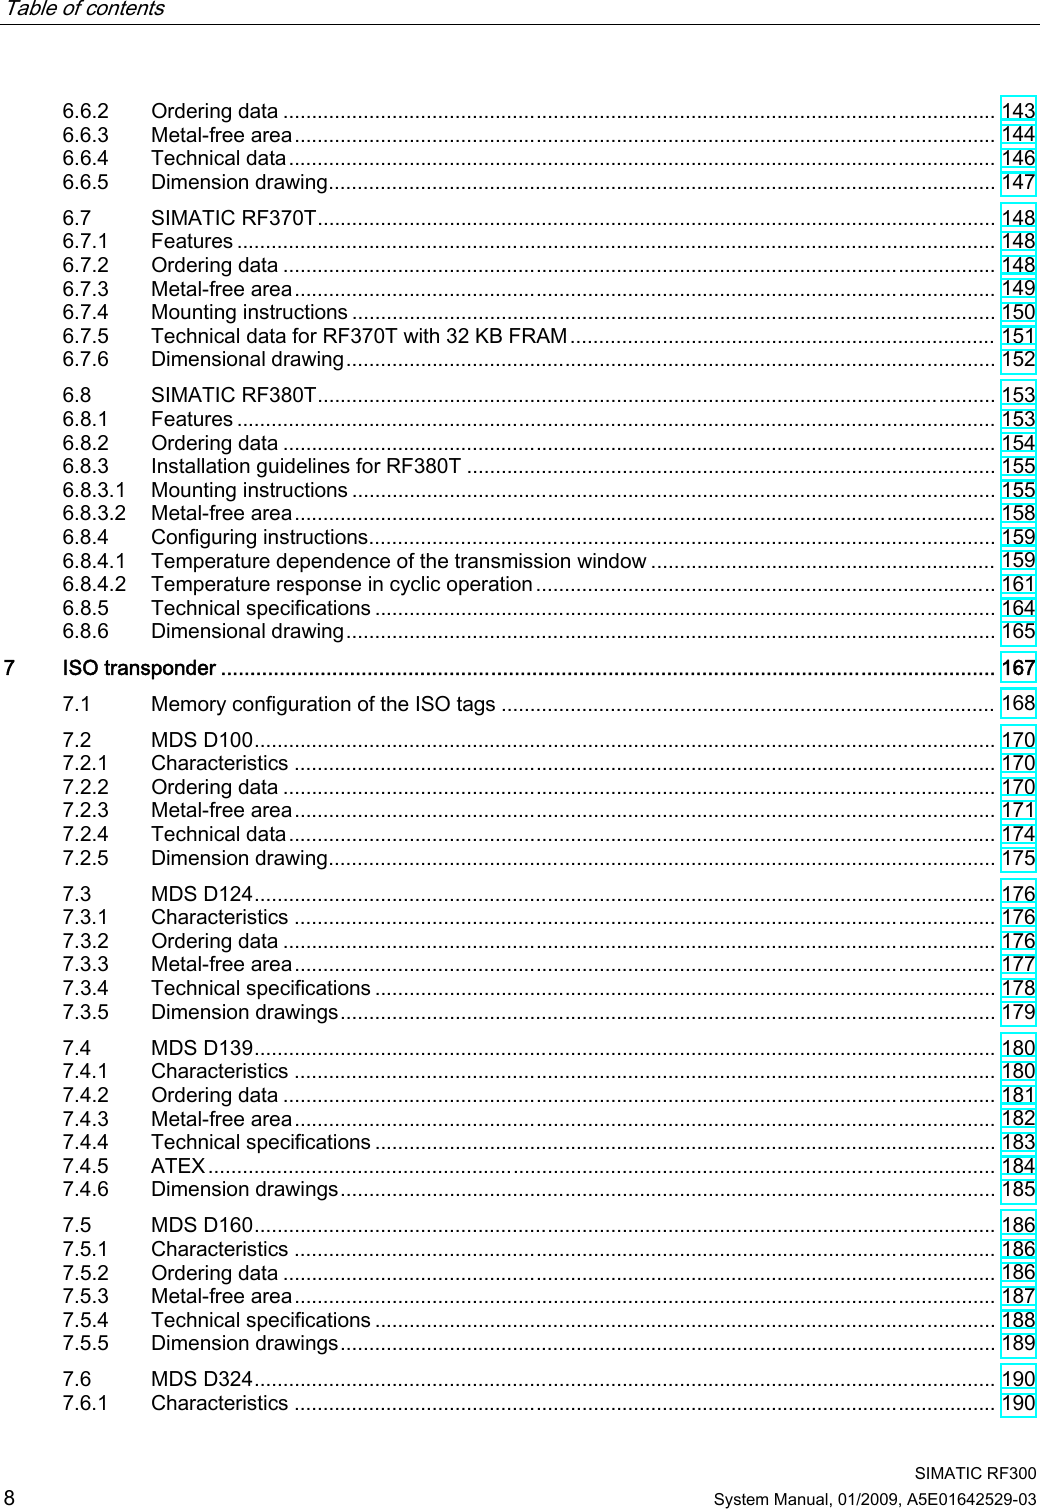 Table of contents      SIMATIC RF300 8 System Manual, 01/2009, A5E01642529-03 6.6.2  Ordering data ............................................................................................................................ 143 6.6.3  Metal-free area.......................................................................................................................... 144 6.6.4  Technical data........................................................................................................................... 146 6.6.5  Dimension drawing.................................................................................................................... 147 6.7  SIMATIC RF370T...................................................................................................................... 148 6.7.1  Features .................................................................................................................................... 148 6.7.2  Ordering data ............................................................................................................................ 148 6.7.3  Metal-free area.......................................................................................................................... 149 6.7.4  Mounting instructions ................................................................................................................ 150 6.7.5  Technical data for RF370T with 32 KB FRAM.......................................................................... 151 6.7.6  Dimensional drawing................................................................................................................. 152 6.8  SIMATIC RF380T...................................................................................................................... 153 6.8.1  Features .................................................................................................................................... 153 6.8.2  Ordering data ............................................................................................................................ 154 6.8.3  Installation guidelines for RF380T ............................................................................................ 155 6.8.3.1  Mounting instructions ................................................................................................................ 155 6.8.3.2  Metal-free area.......................................................................................................................... 158 6.8.4  Configuring instructions............................................................................................................. 159 6.8.4.1  Temperature dependence of the transmission window ............................................................ 159 6.8.4.2  Temperature response in cyclic operation ................................................................................ 161 6.8.5  Technical specifications ............................................................................................................ 164 6.8.6  Dimensional drawing................................................................................................................. 165 7  ISO transponder .................................................................................................................................... 167 7.1  Memory configuration of the ISO tags ...................................................................................... 168 7.2  MDS D100................................................................................................................................. 170 7.2.1  Characteristics .......................................................................................................................... 170 7.2.2  Ordering data ............................................................................................................................ 170 7.2.3  Metal-free area.......................................................................................................................... 171 7.2.4  Technical data........................................................................................................................... 174 7.2.5  Dimension drawing.................................................................................................................... 175 7.3  MDS D124................................................................................................................................. 176 7.3.1  Characteristics .......................................................................................................................... 176 7.3.2  Ordering data ............................................................................................................................ 176 7.3.3  Metal-free area.......................................................................................................................... 177 7.3.4  Technical specifications ............................................................................................................ 178 7.3.5  Dimension drawings.................................................................................................................. 179 7.4  MDS D139................................................................................................................................. 180 7.4.1  Characteristics .......................................................................................................................... 180 7.4.2  Ordering data ............................................................................................................................ 181 7.4.3  Metal-free area.......................................................................................................................... 182 7.4.4  Technical specifications ............................................................................................................ 183 7.4.5  ATEX......................................................................................................................................... 184 7.4.6  Dimension drawings.................................................................................................................. 185 7.5  MDS D160................................................................................................................................. 186 7.5.1  Characteristics .......................................................................................................................... 186 7.5.2  Ordering data ............................................................................................................................ 186 7.5.3  Metal-free area.......................................................................................................................... 187 7.5.4  Technical specifications ............................................................................................................ 188 7.5.5  Dimension drawings.................................................................................................................. 189 7.6  MDS D324................................................................................................................................. 190 7.6.1  Characteristics .......................................................................................................................... 190 